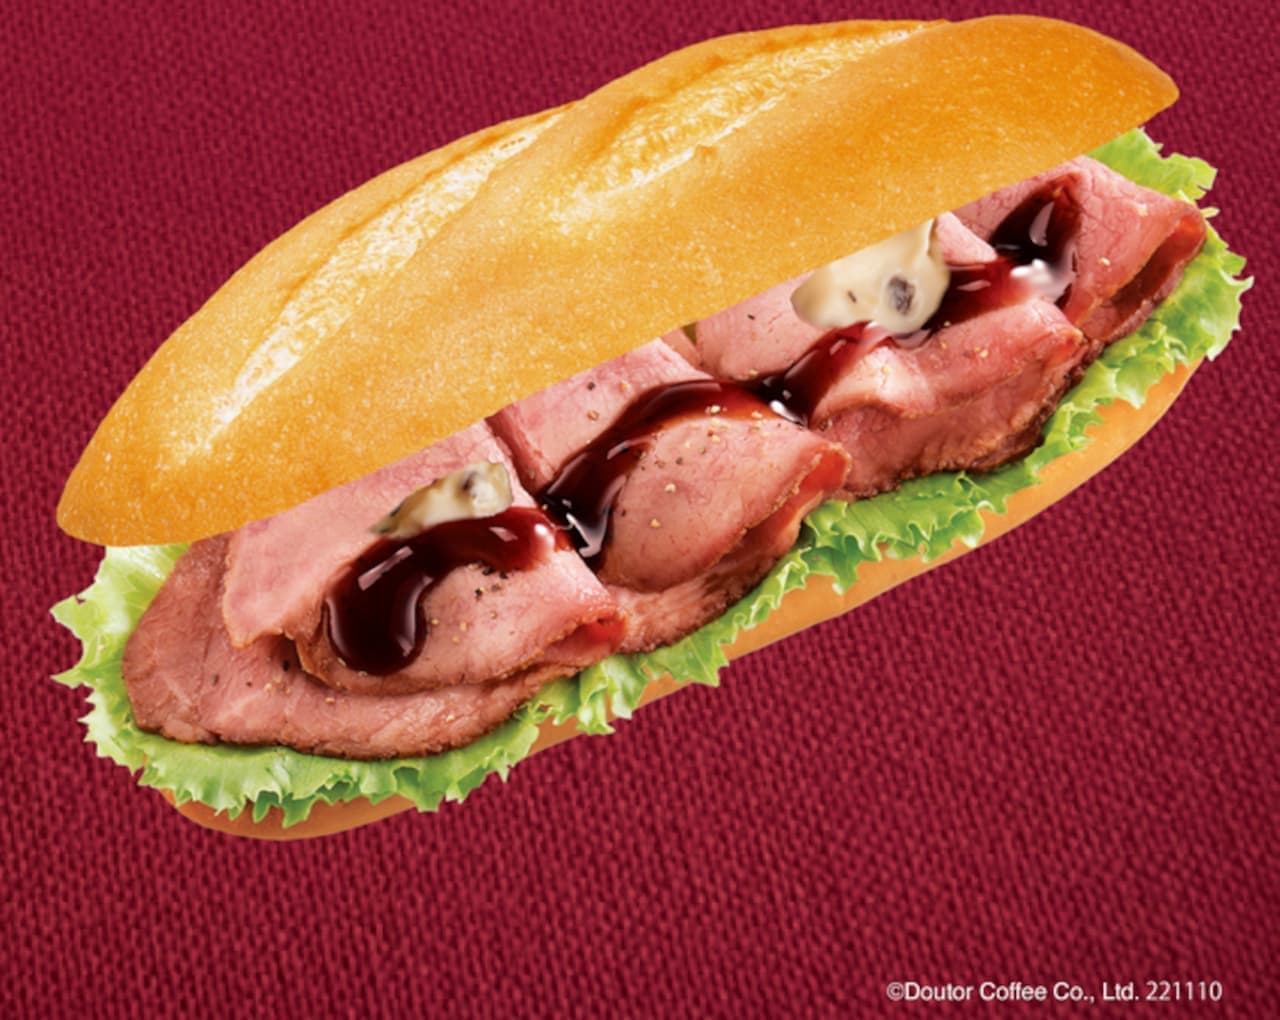 Doutor Coffee Shop "Luxury Milano Sandwich - Roast Beef Grilled over Direct Fire with Red Wine Balsamic Vinegar Sauce